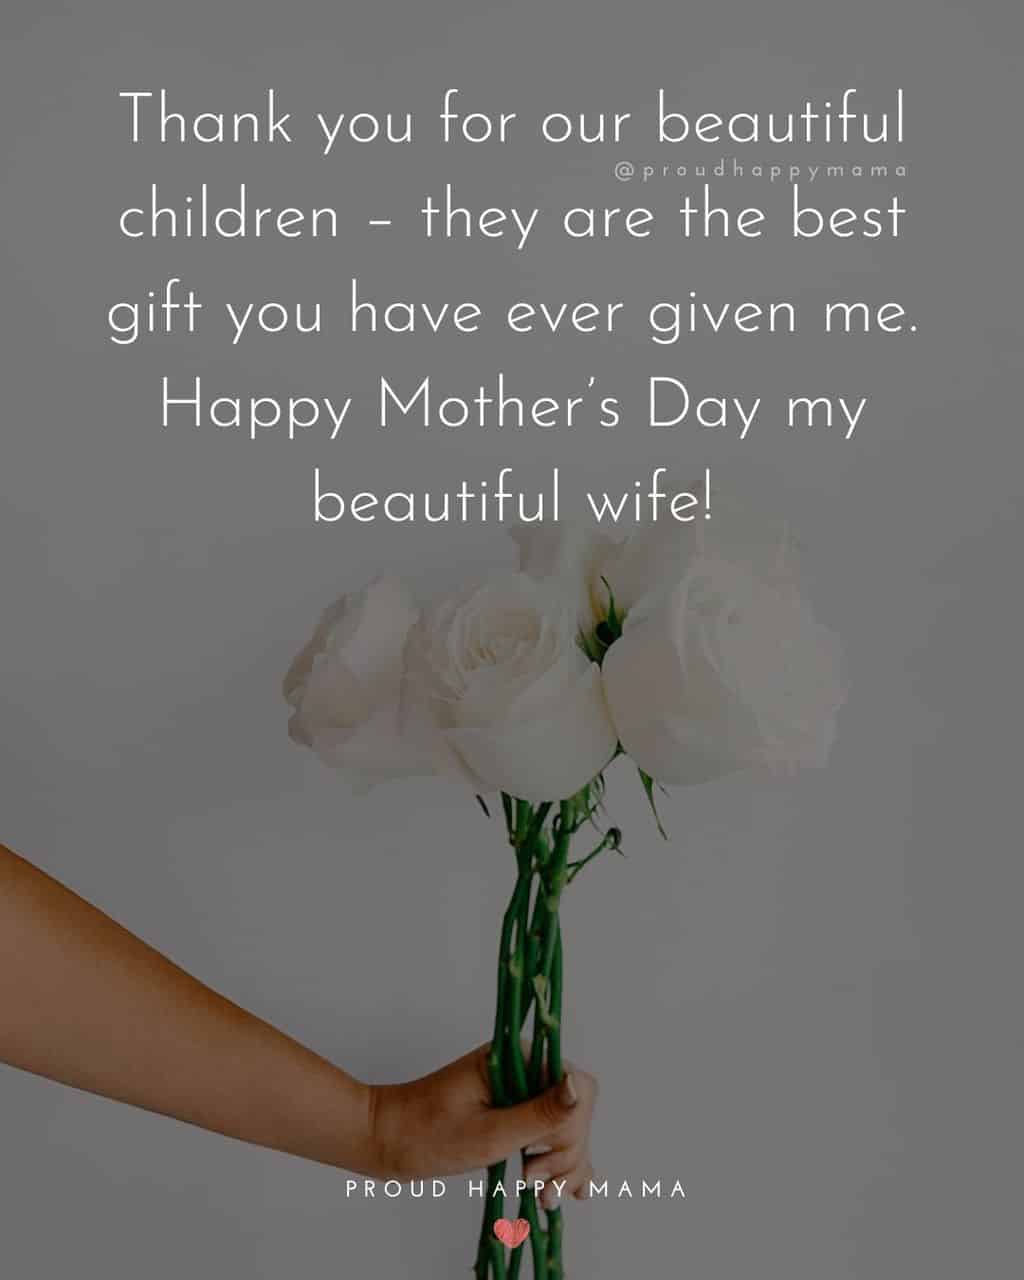 Happy Mothers Day Quotes For Wife - Thank you for our beautiful children – they are the best gift you have ever given